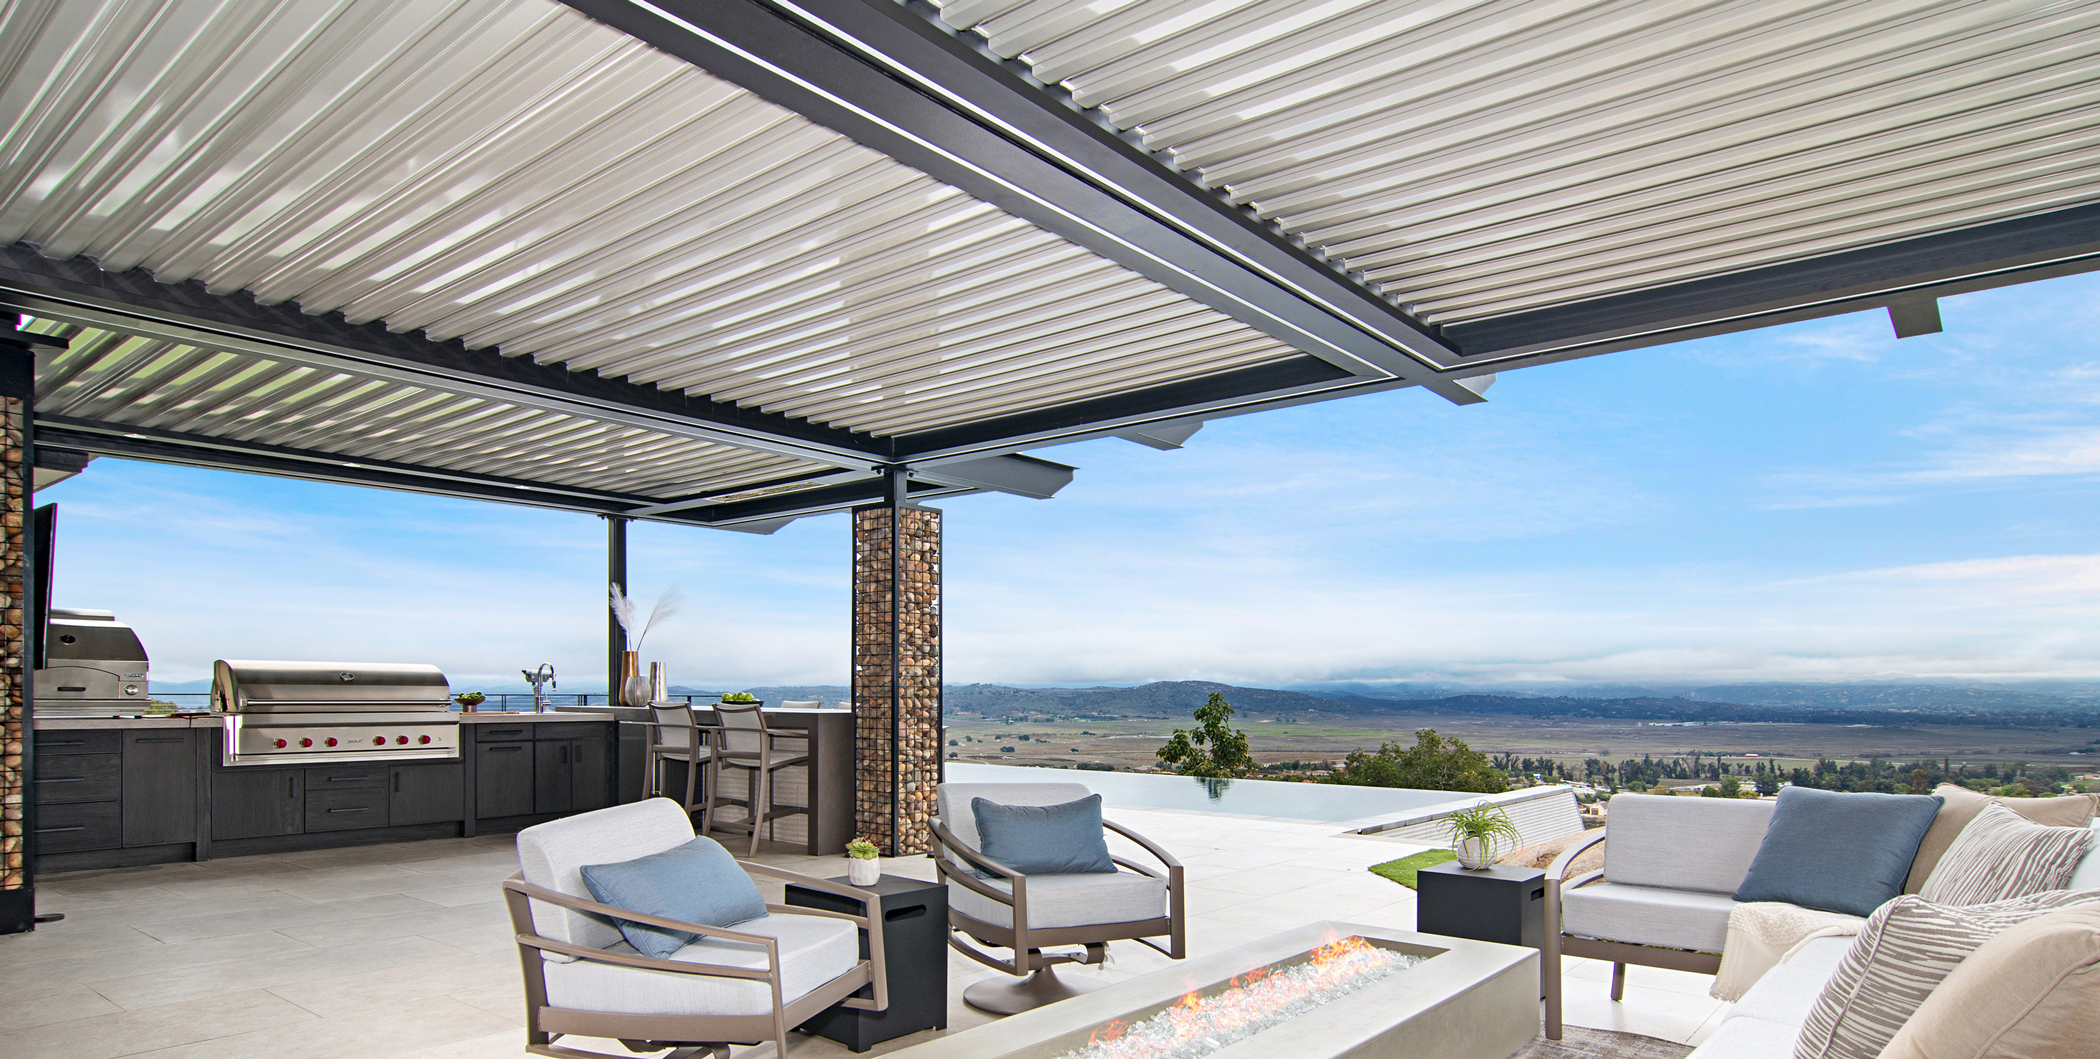 Awnings by Sonoran Retractables